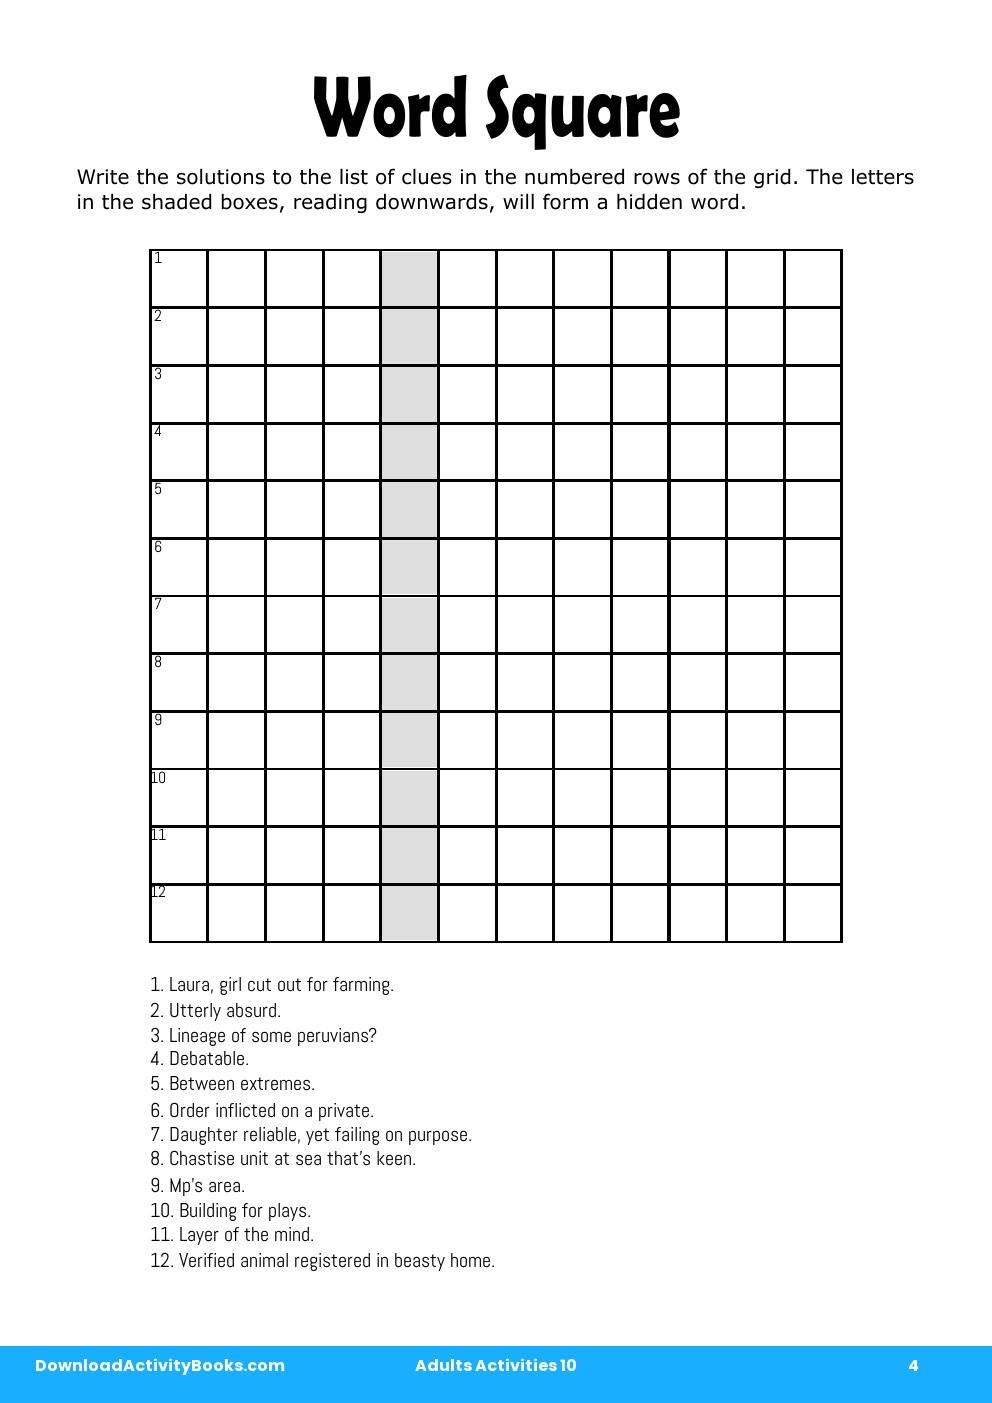 Word Square in Adults Activities 10